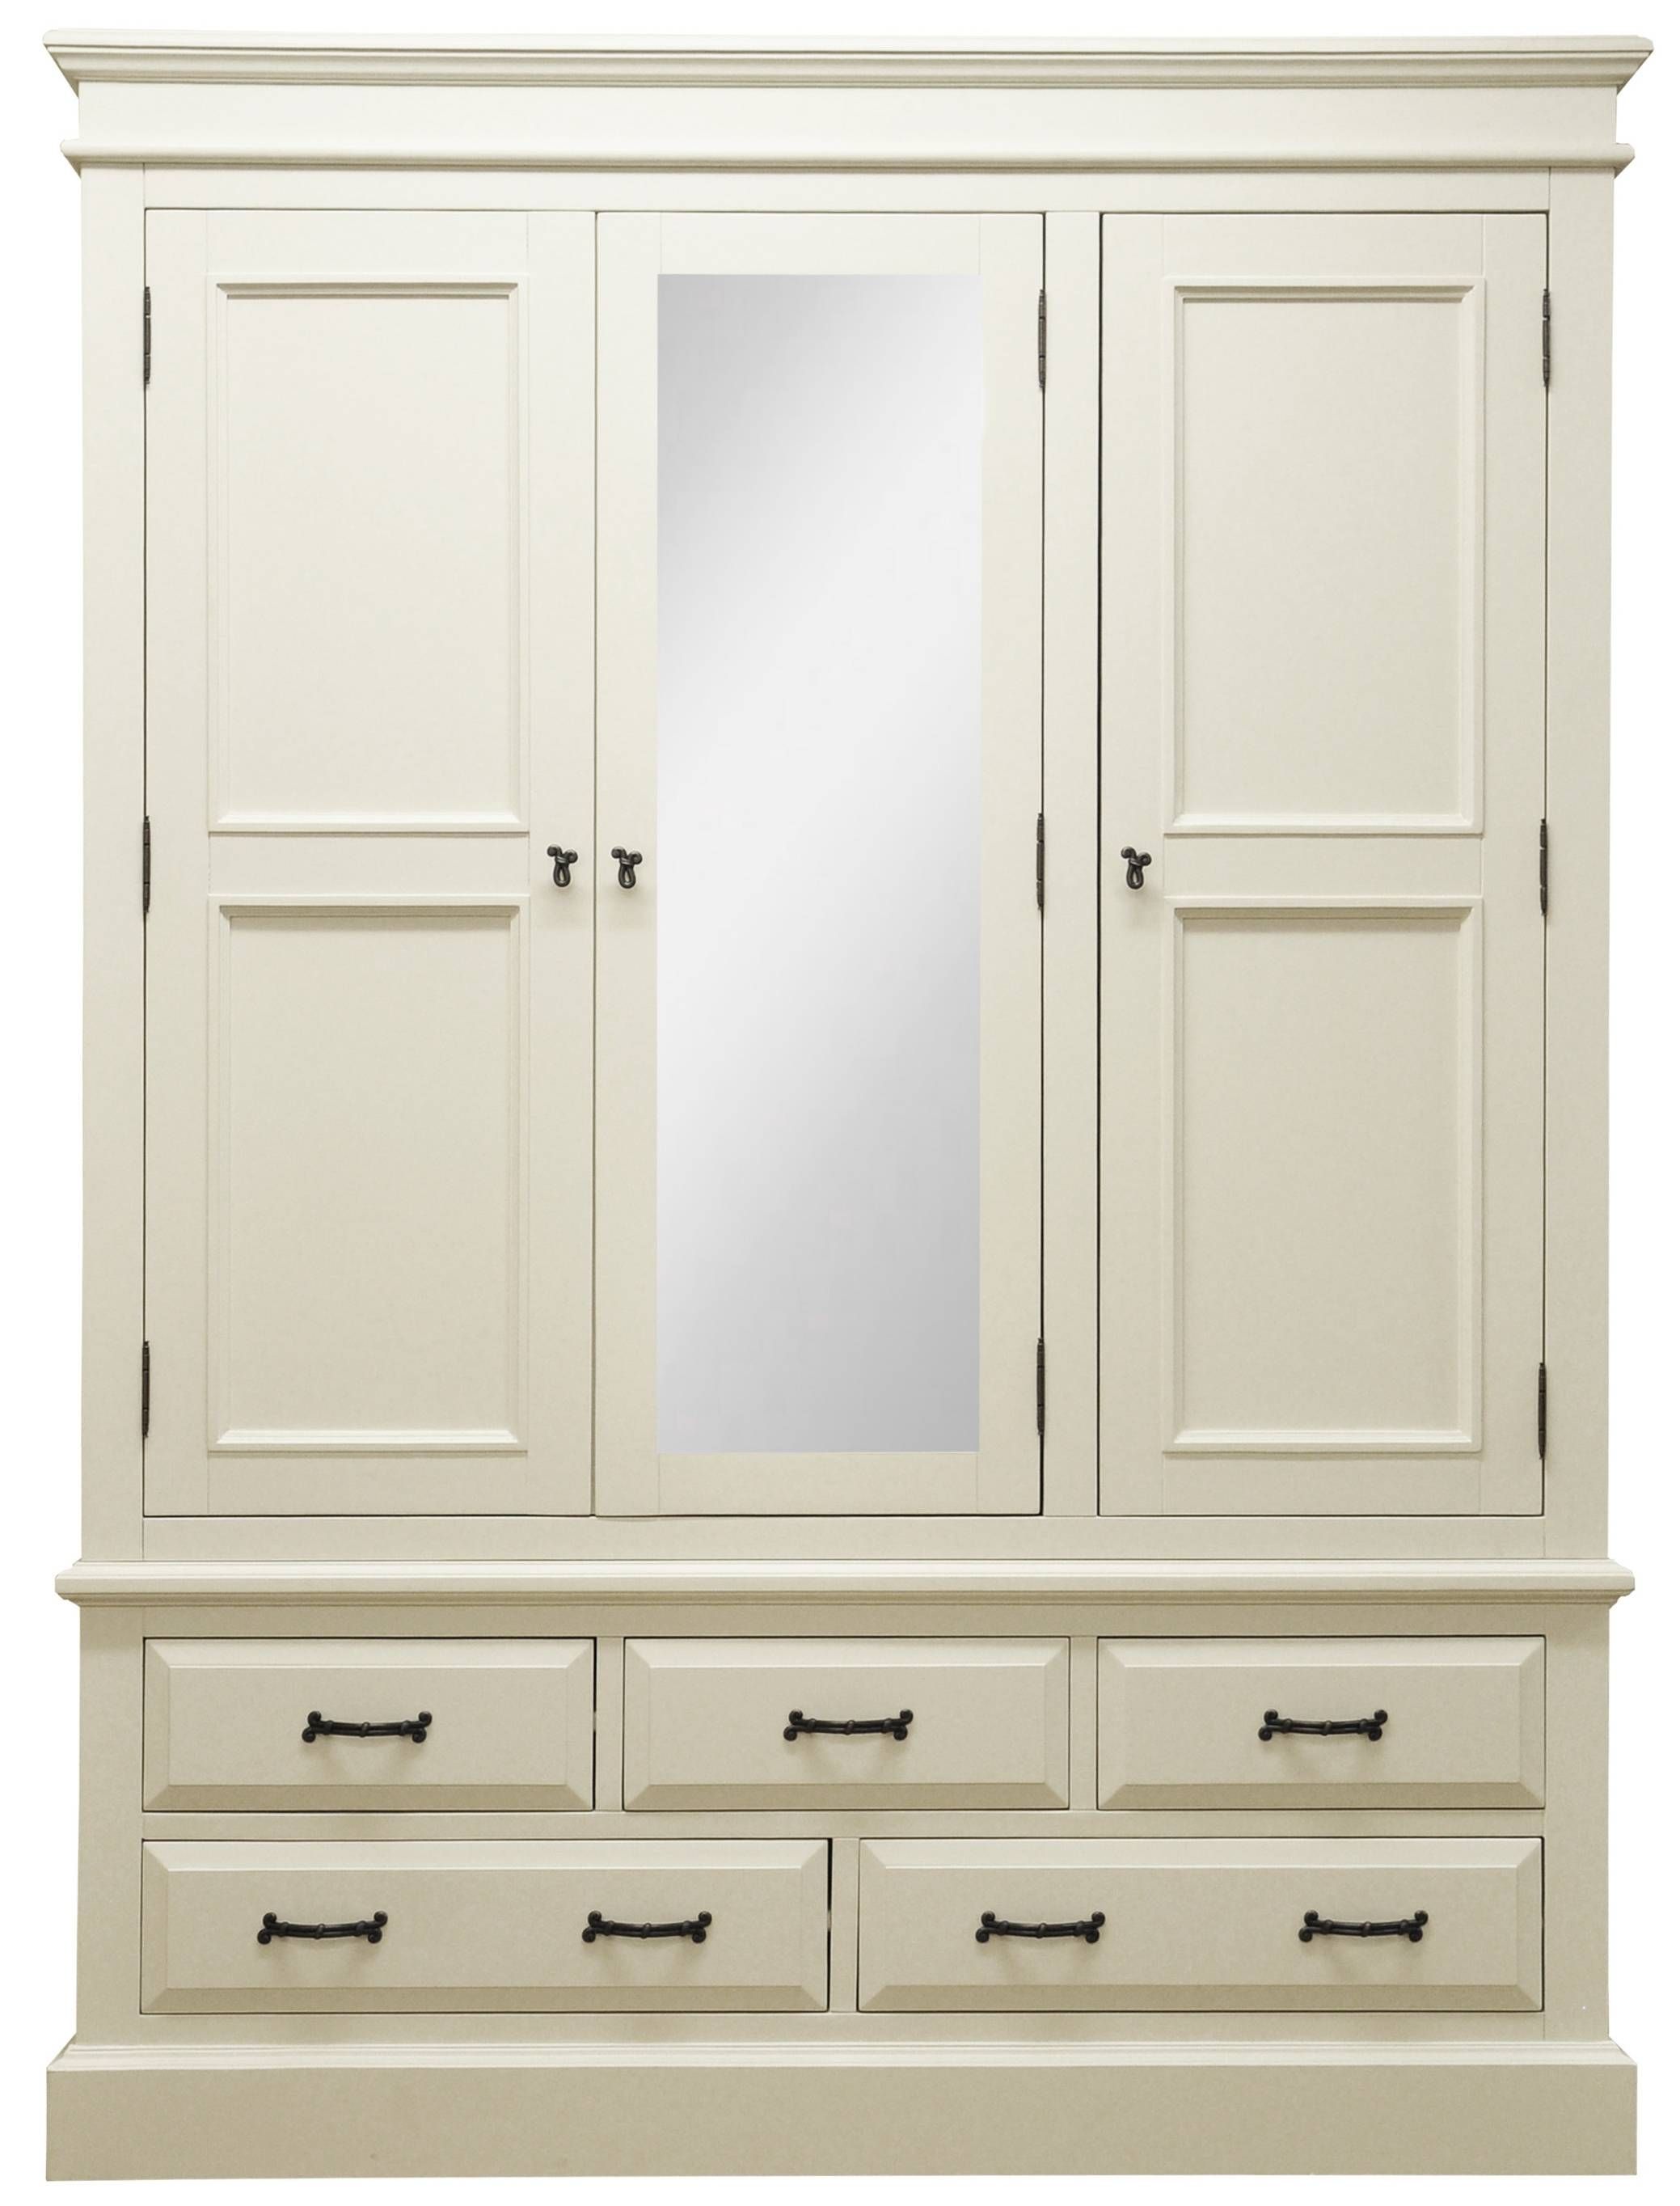 Wardrobes : Henleaze 5 Drawer Painted Wardrobe With Mirrorhenleaze Intended For Triple Mirrored Wardrobes (View 5 of 15)